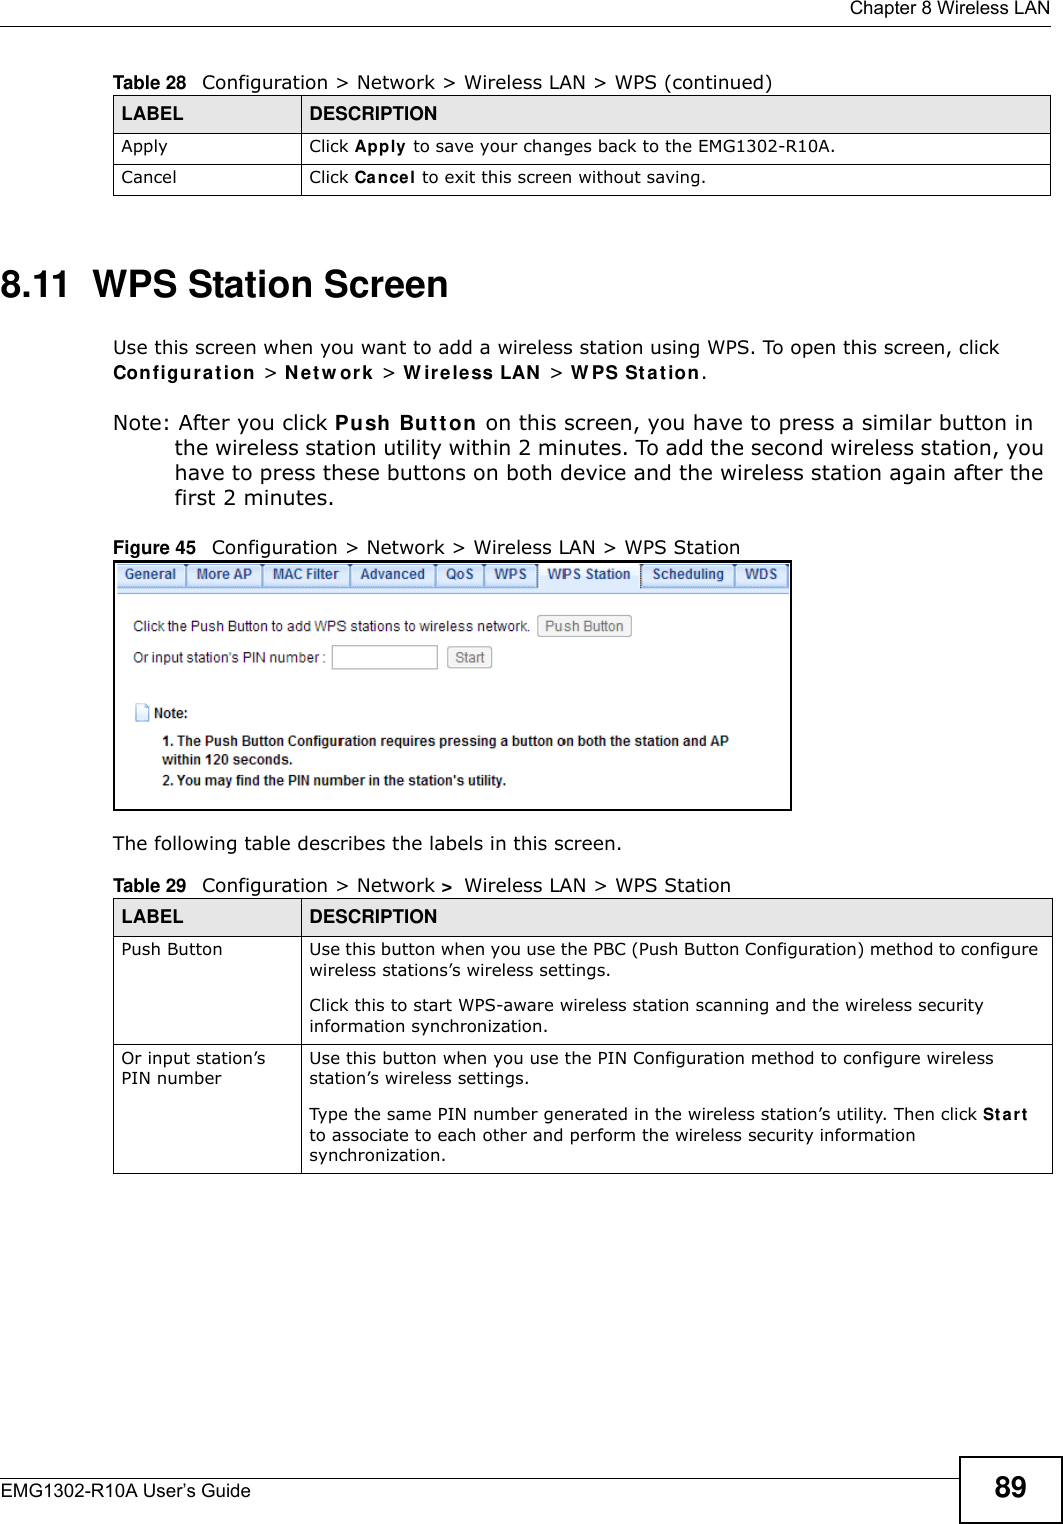  Chapter 8 Wireless LANEMG1302-R10A User’s Guide 898.11  WPS Station ScreenUse this screen when you want to add a wireless station using WPS. To open this screen, click Conf igur at ion  &gt; N e t w or k &gt; W irele ss LAN &gt; W PS St at ion.Note: After you click Push Butt on on this screen, you have to press a similar button in the wireless station utility within 2 minutes. To add the second wireless station, you have to press these buttons on both device and the wireless station again after the first 2 minutes.Figure 45   Configuration &gt; Network &gt; Wireless LAN &gt; WPS StationThe following table describes the labels in this screen.Apply Click Apply to save your changes back to the EMG1302-R10A.Cancel Click Cancel to exit this screen without saving.Table 28   Configuration &gt; Network &gt; Wireless LAN &gt; WPS (continued)LABEL DESCRIPTIONTable 29   Configuration &gt; Network &gt;  Wireless LAN &gt; WPS StationLABEL DESCRIPTIONPush Button Use this button when you use the PBC (Push Button Configuration) method to configure wireless stations’s wireless settings.Click this to start WPS-aware wireless station scanning and the wireless security information synchronization.Or input station’s PIN numberUse this button when you use the PIN Configuration method to configure wireless station’s wireless settings.Type the same PIN number generated in the wireless station’s utility. Then click St a r t  to associate to each other and perform the wireless security information synchronization.